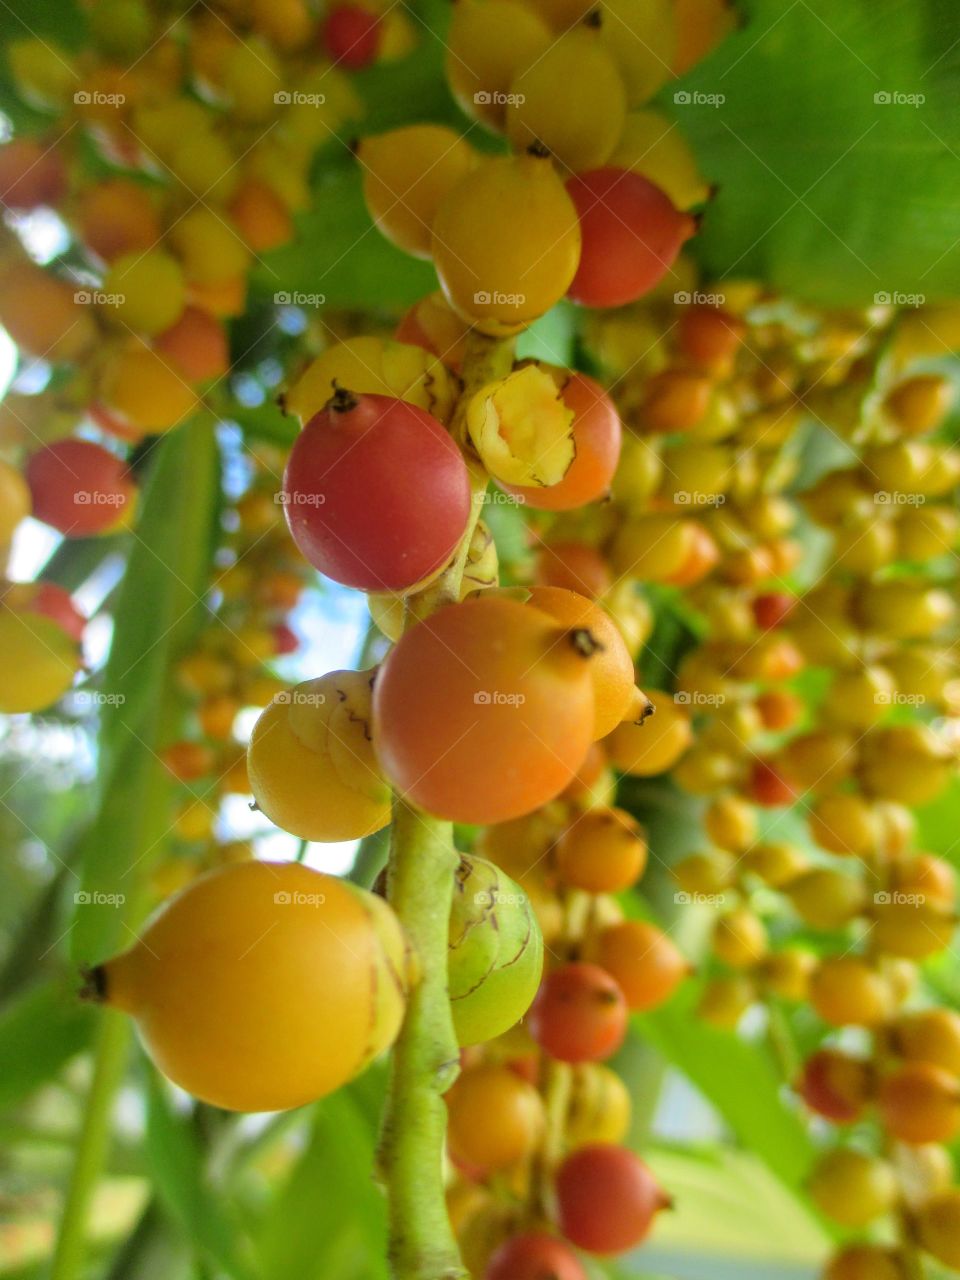 Fruit growing on plant